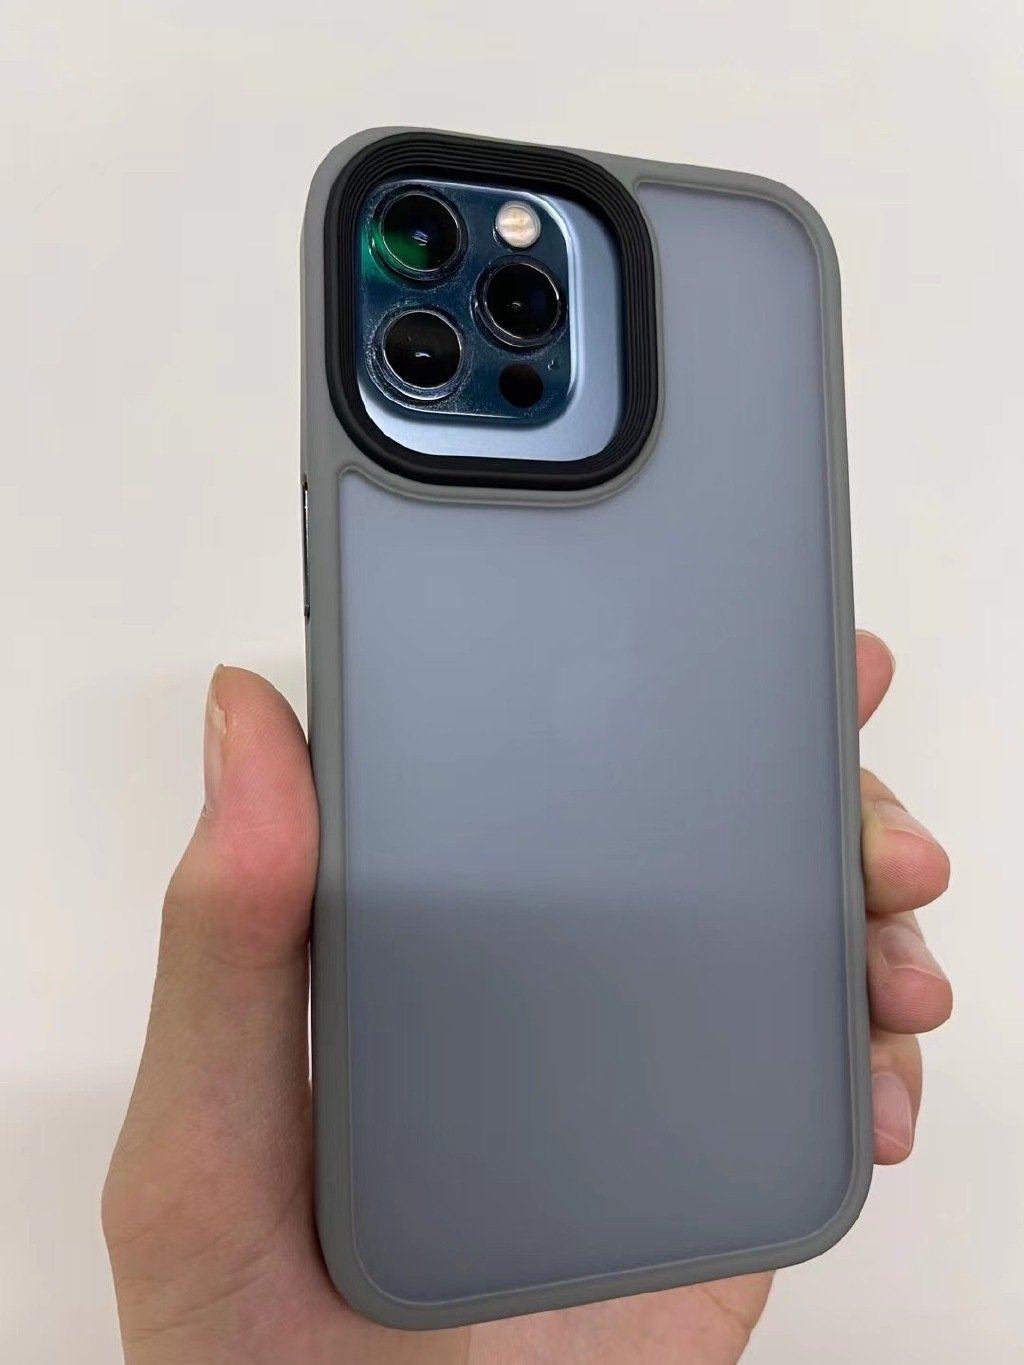 Alleged iPhone 13 Pro Case Has Cutout for Significantly Larger Camera Module [Images]